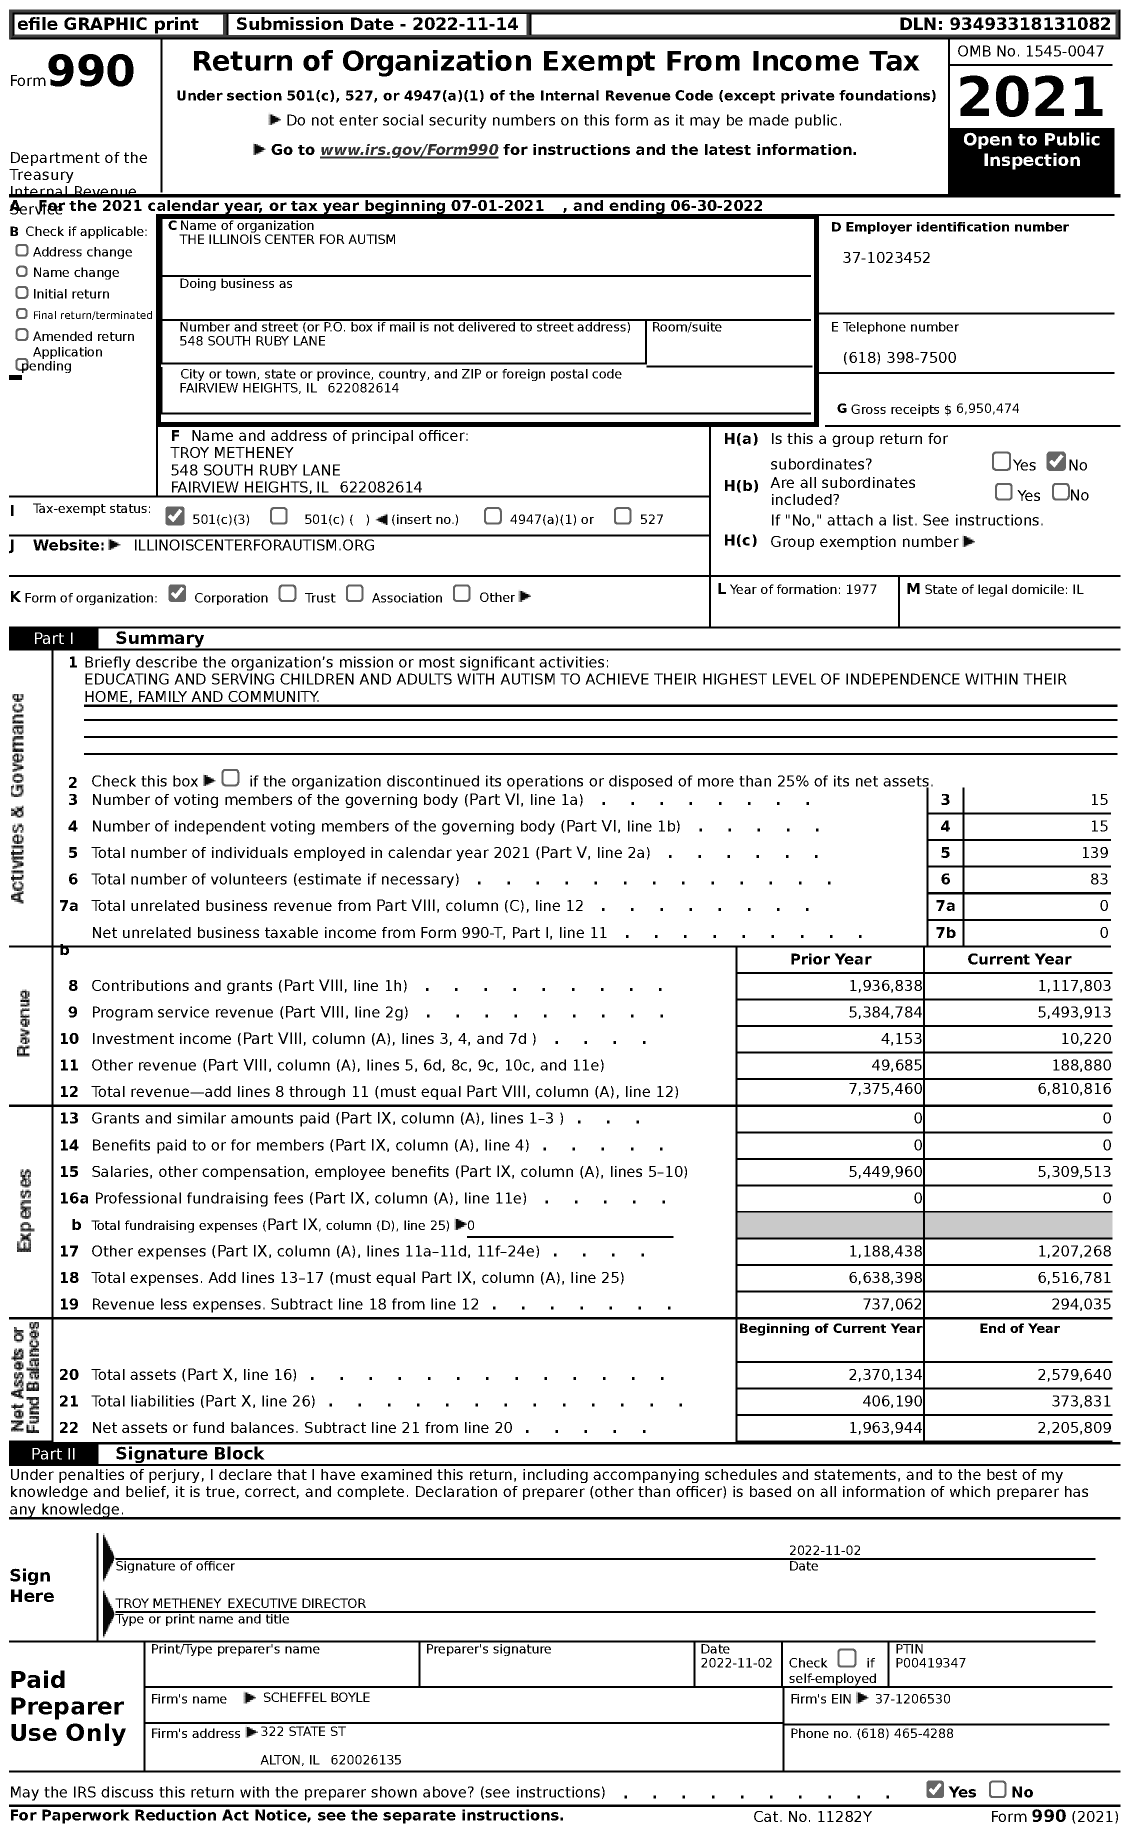 Image of first page of 2021 Form 990 for Illinois Center for Autism (ICA)